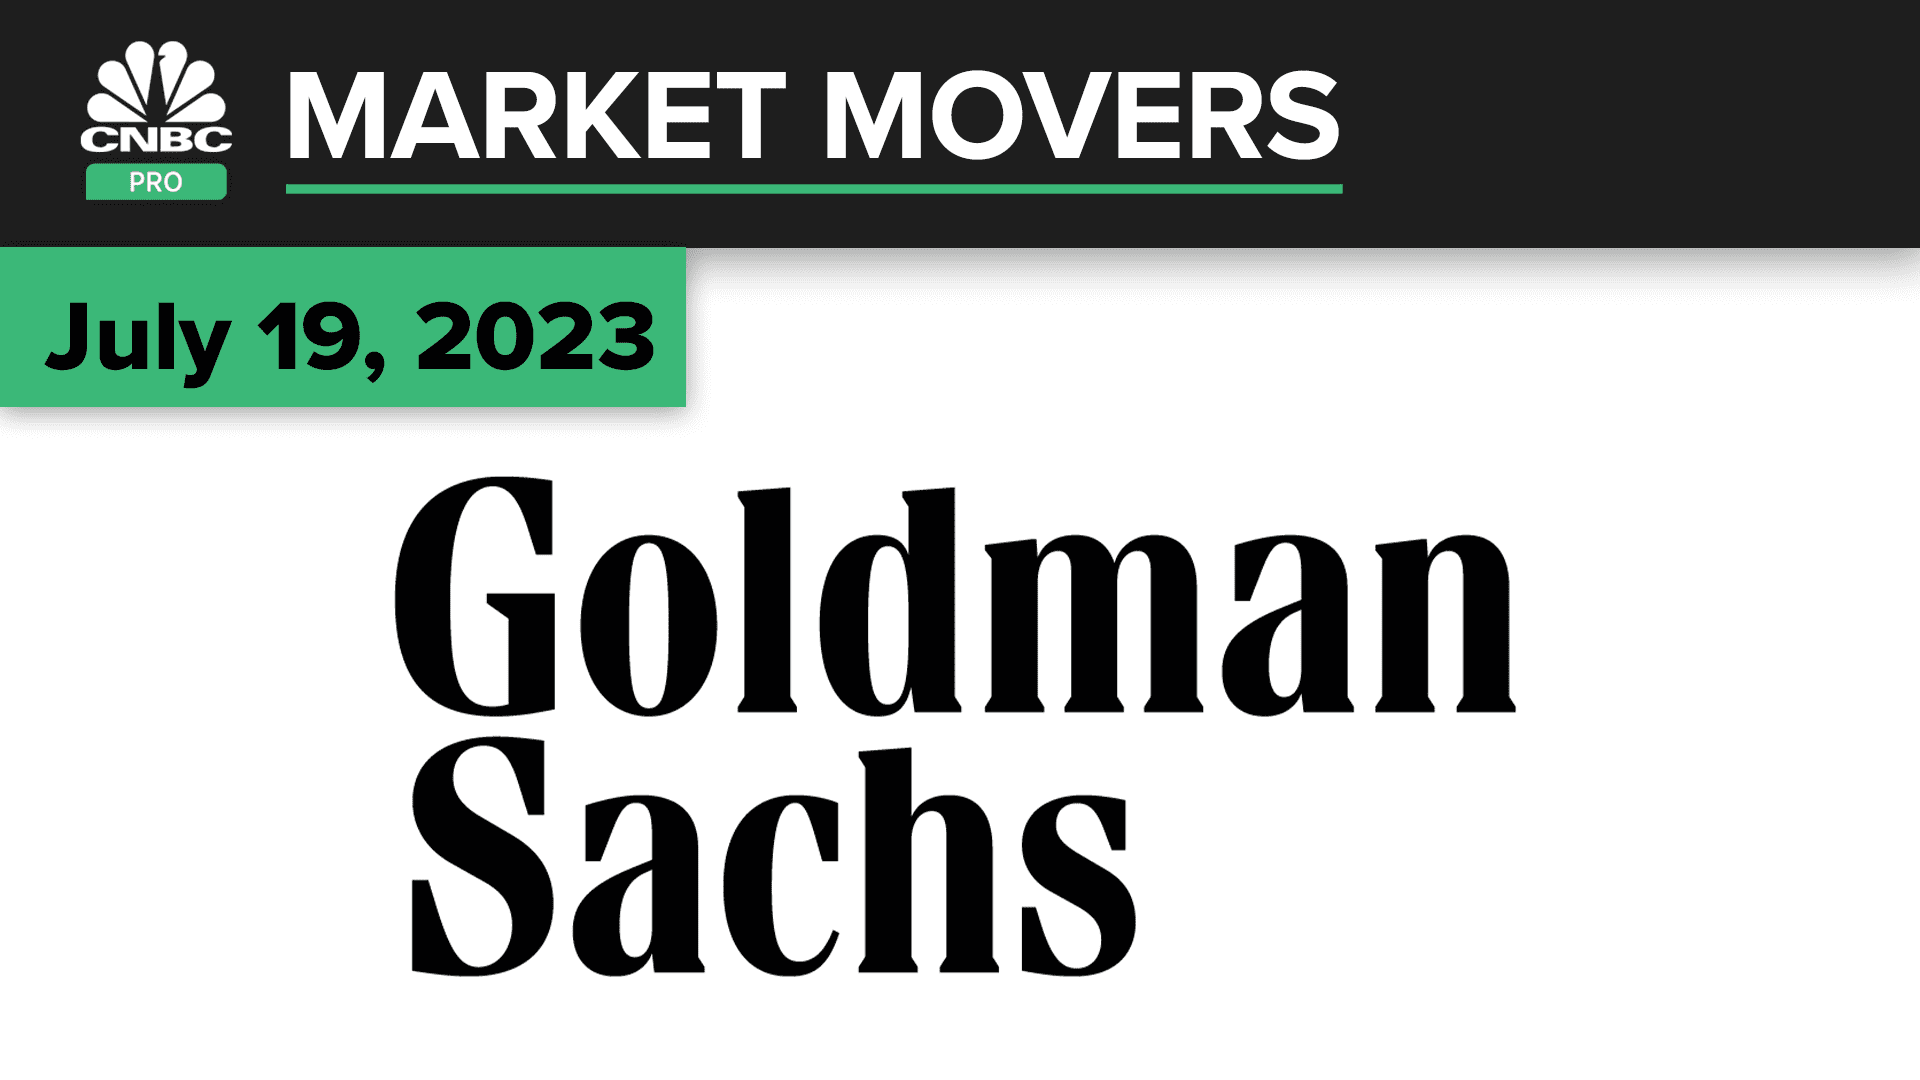 Goldman Sachs reports mixed second-quarter results. Here's what the pros are saying